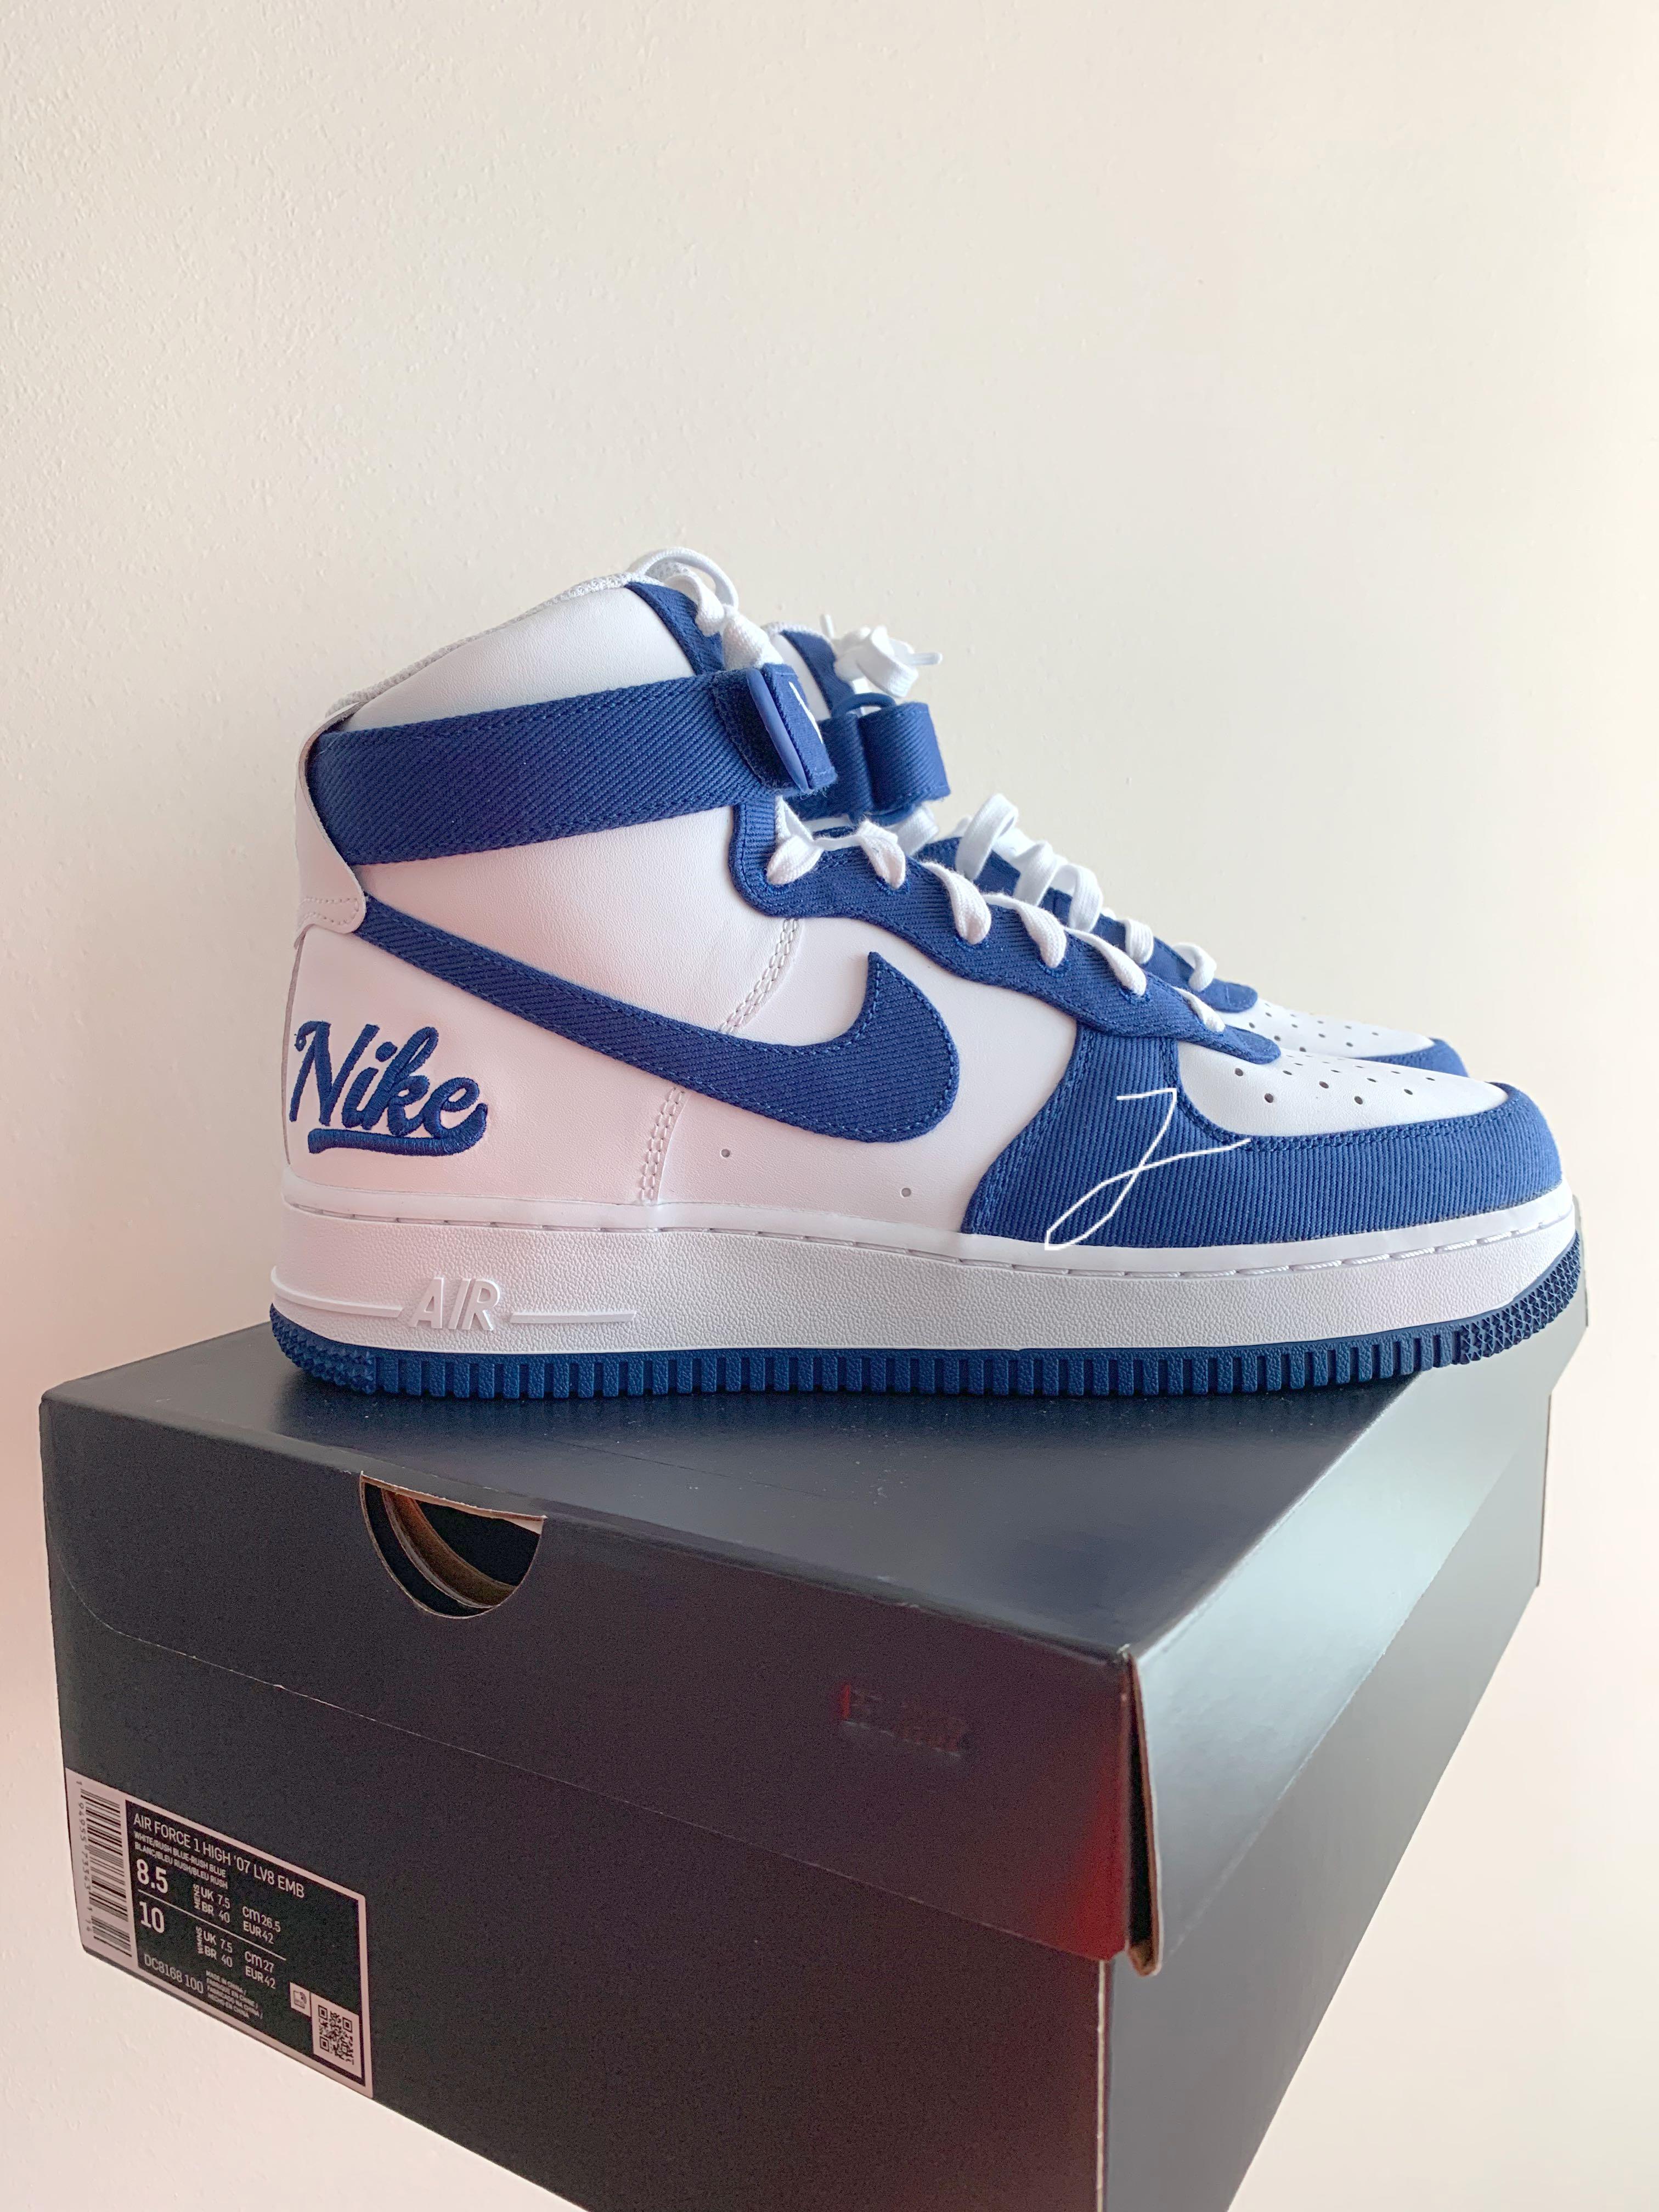 Size 10 - Nike Air Force 1 High '07 LV8 EMB Dodgers 2021